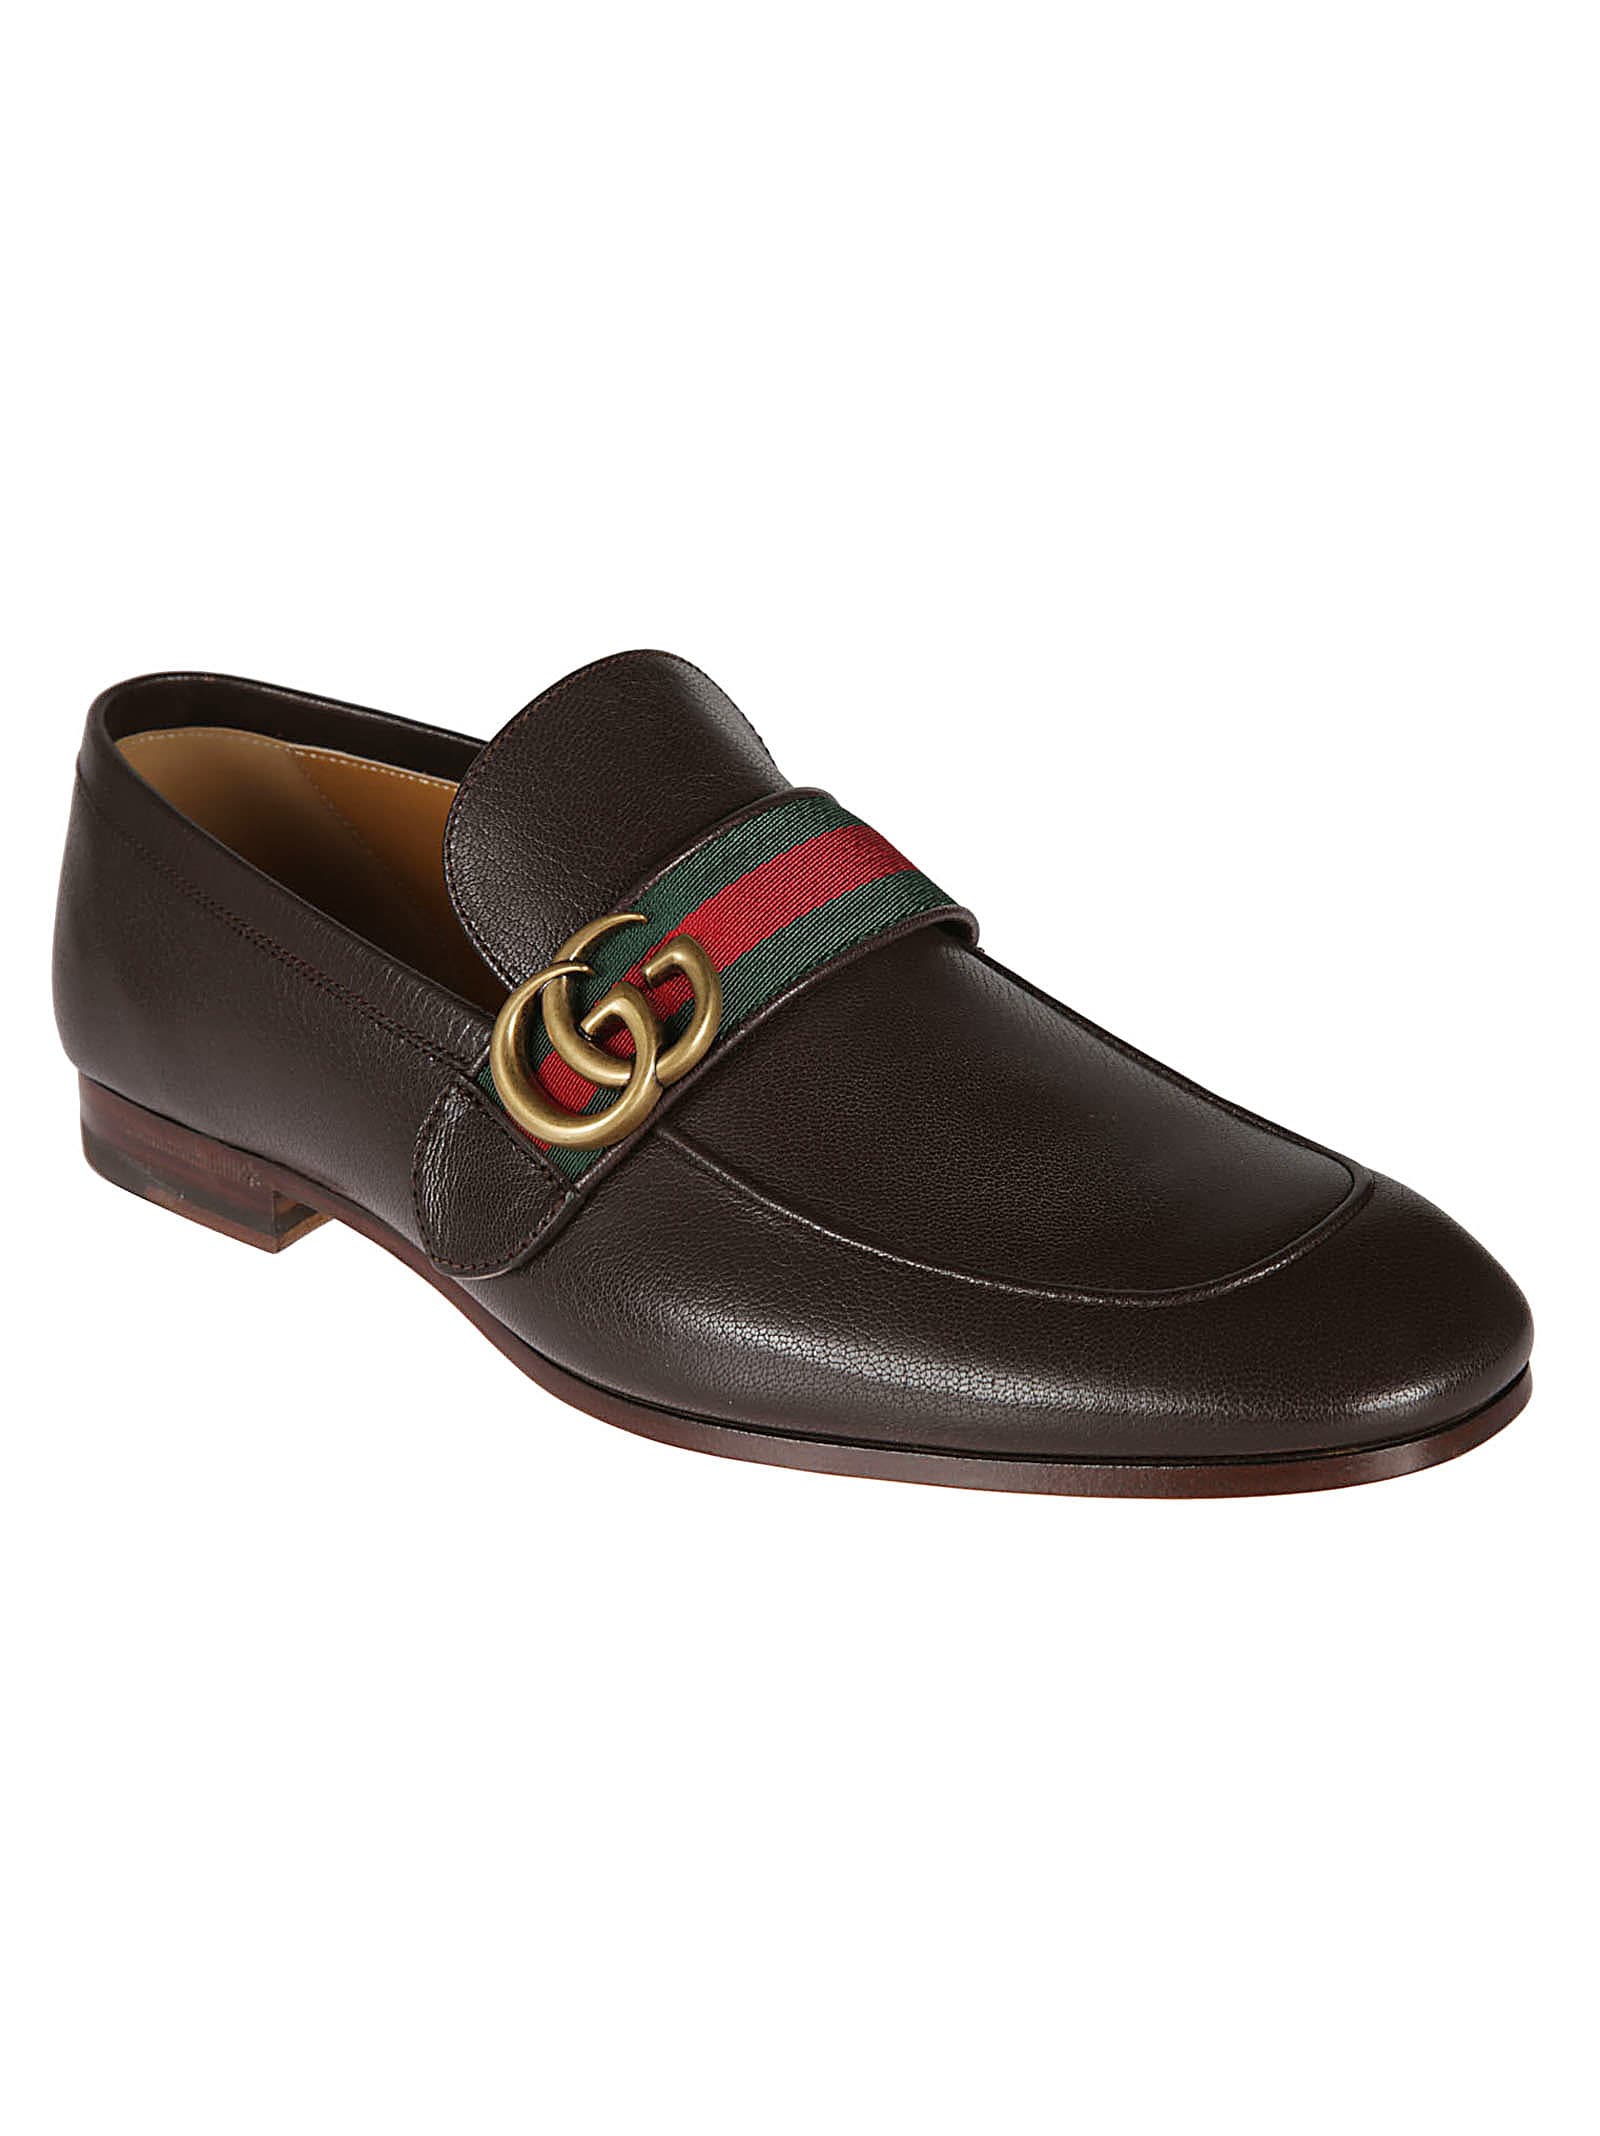 gucci loafers logo